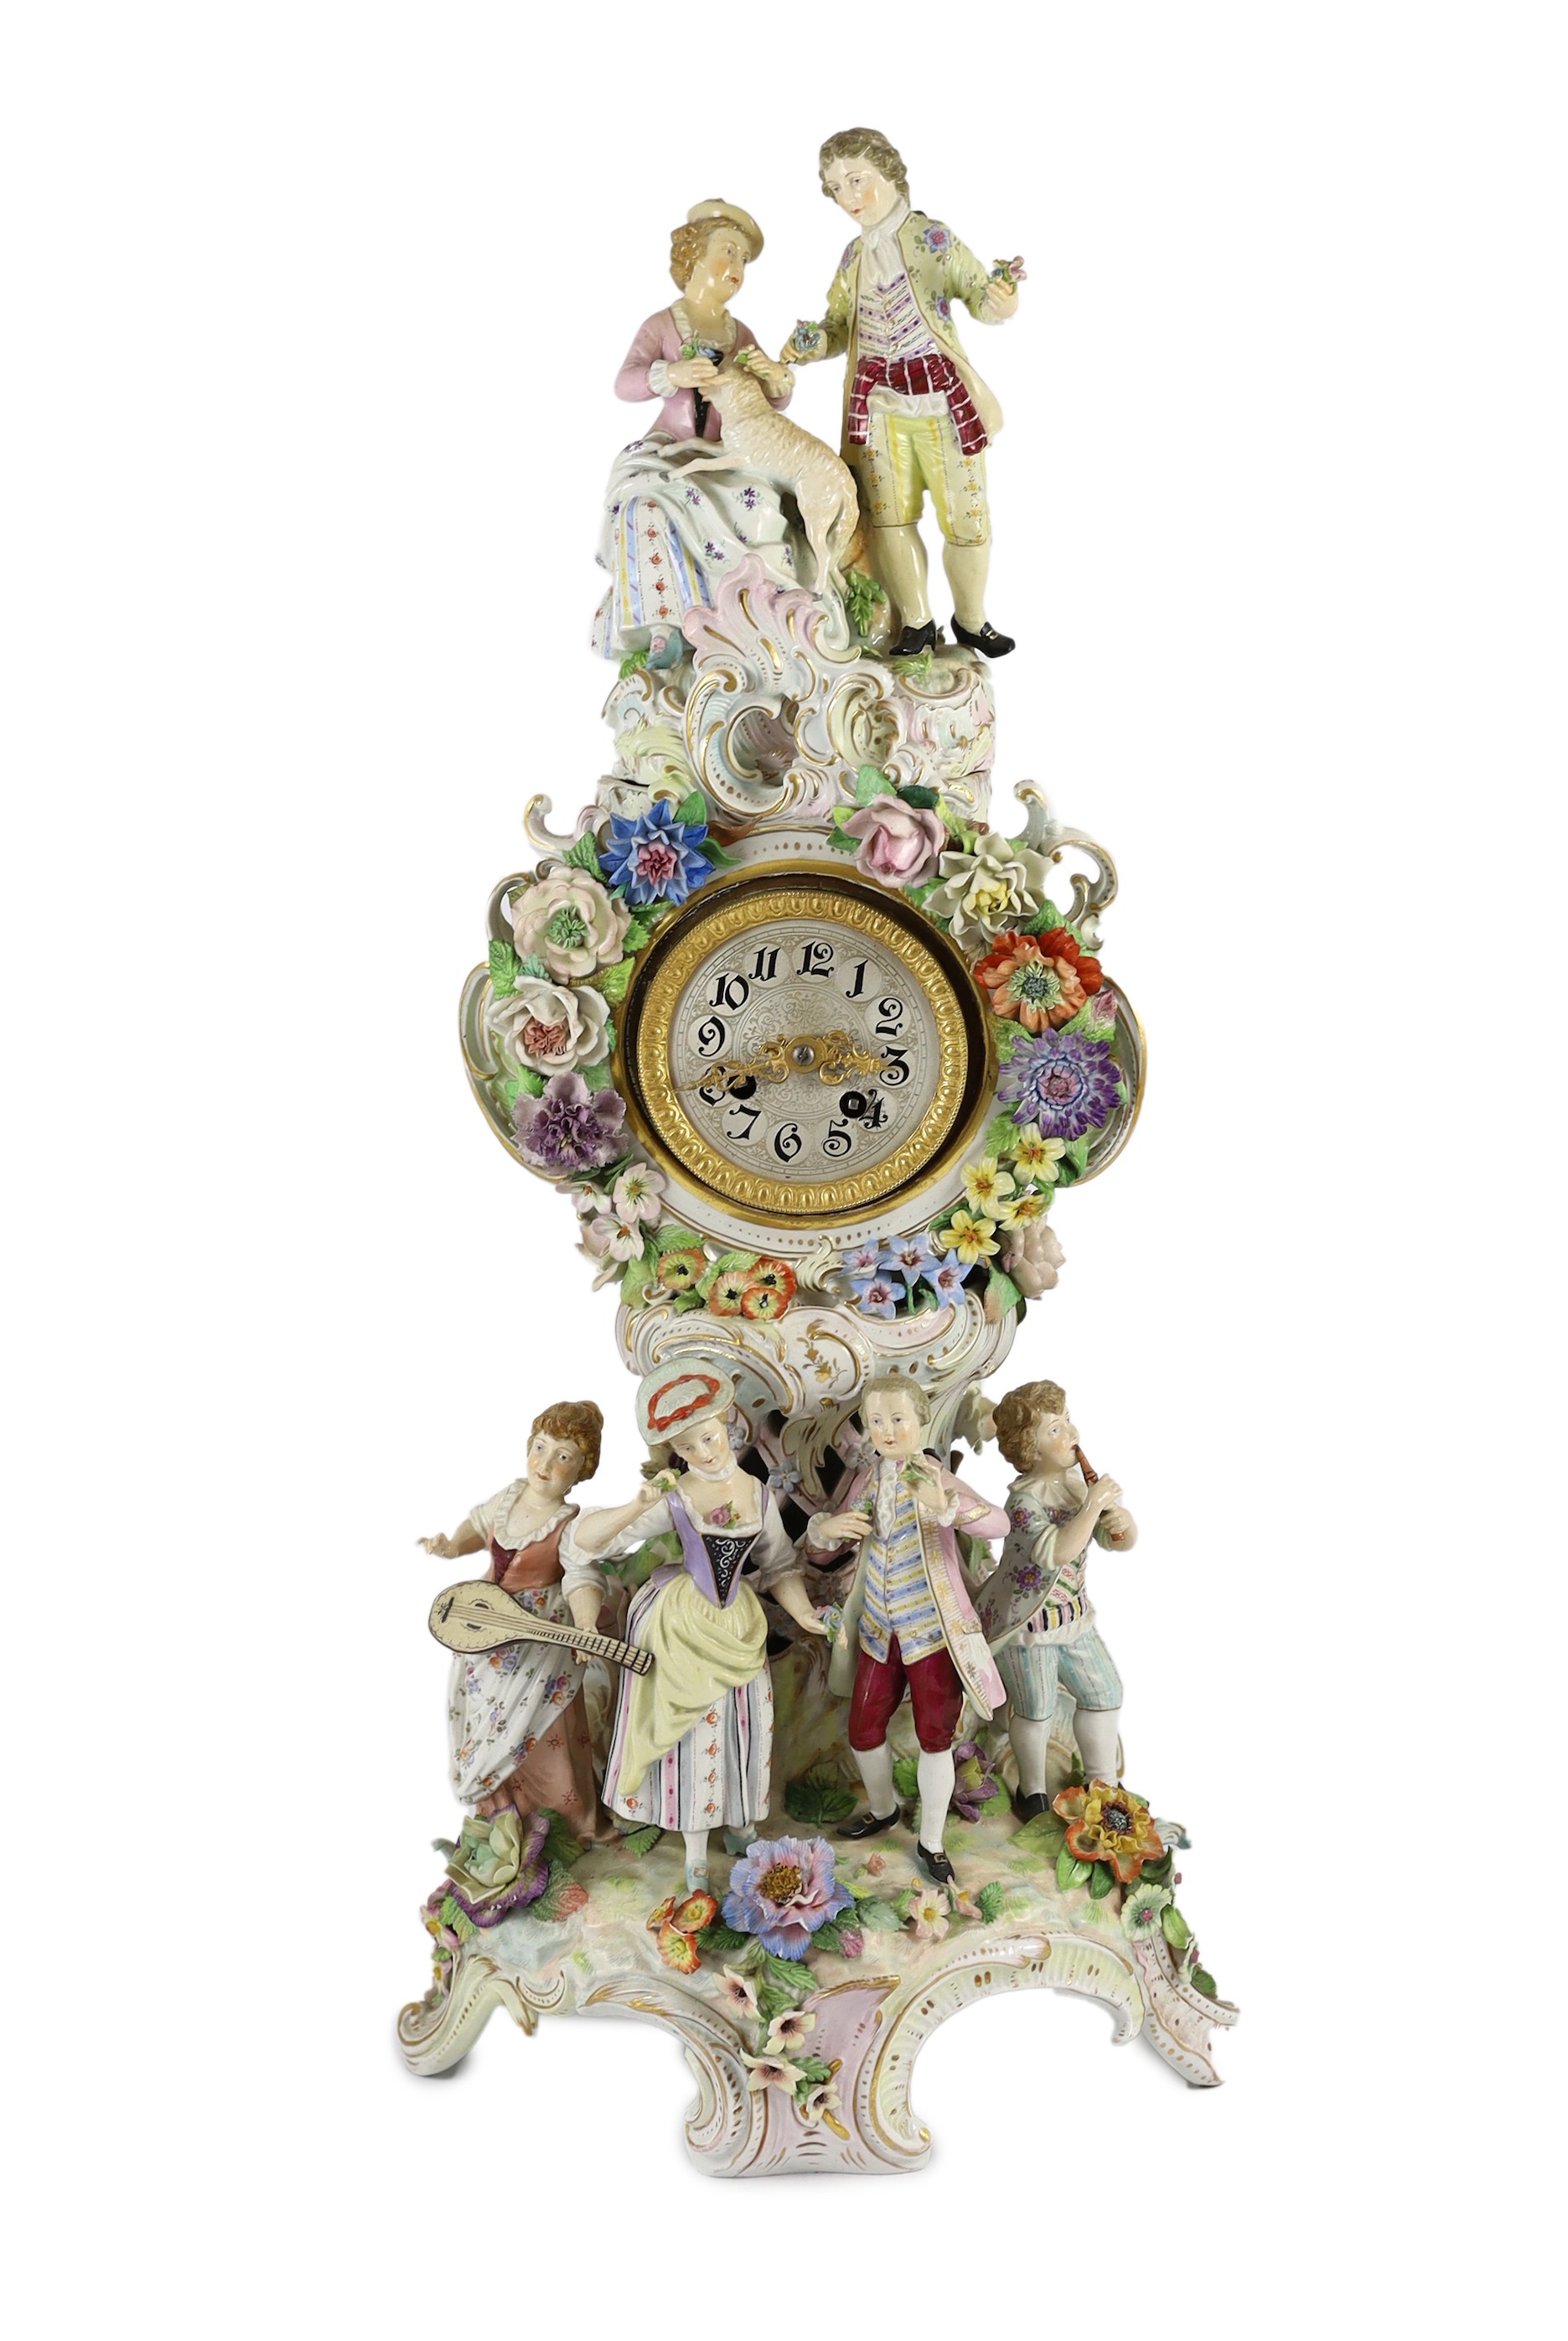 An impressive German porcelain floral encrusted figural mantel clock, late 19th century, Total height 65 cm                                                                                                                 